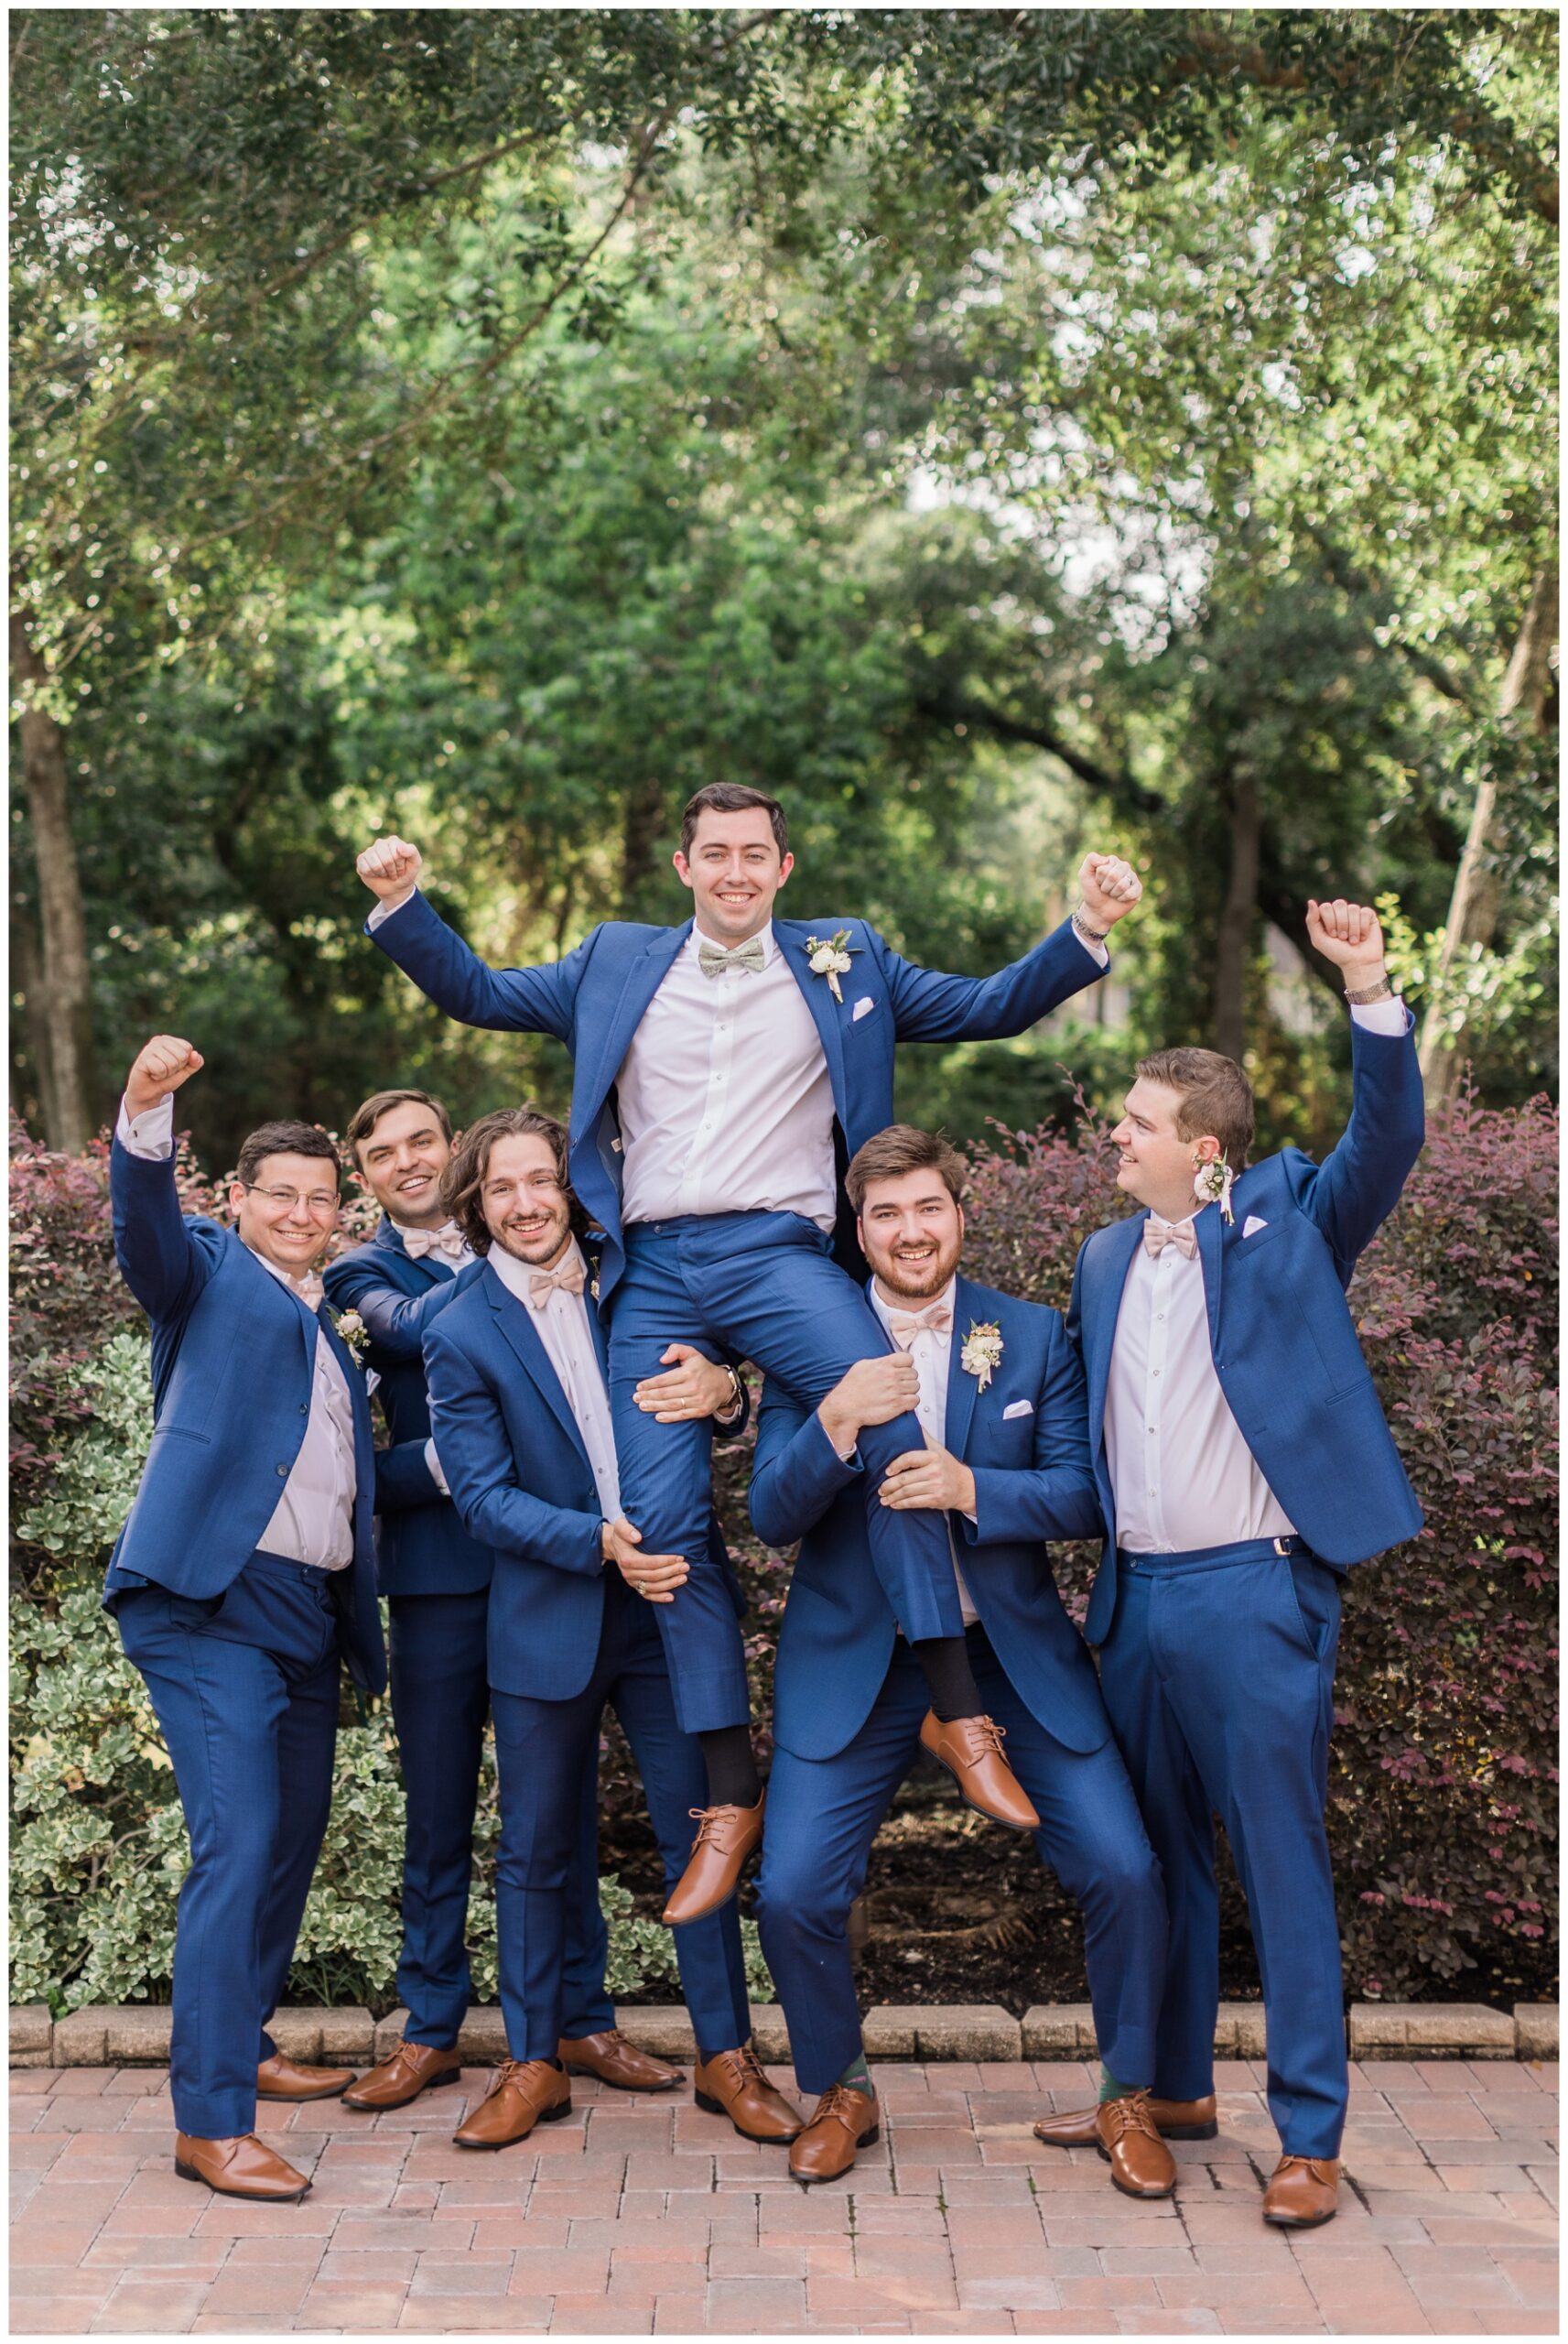 Bridal party portraits at The Springs in Cypress